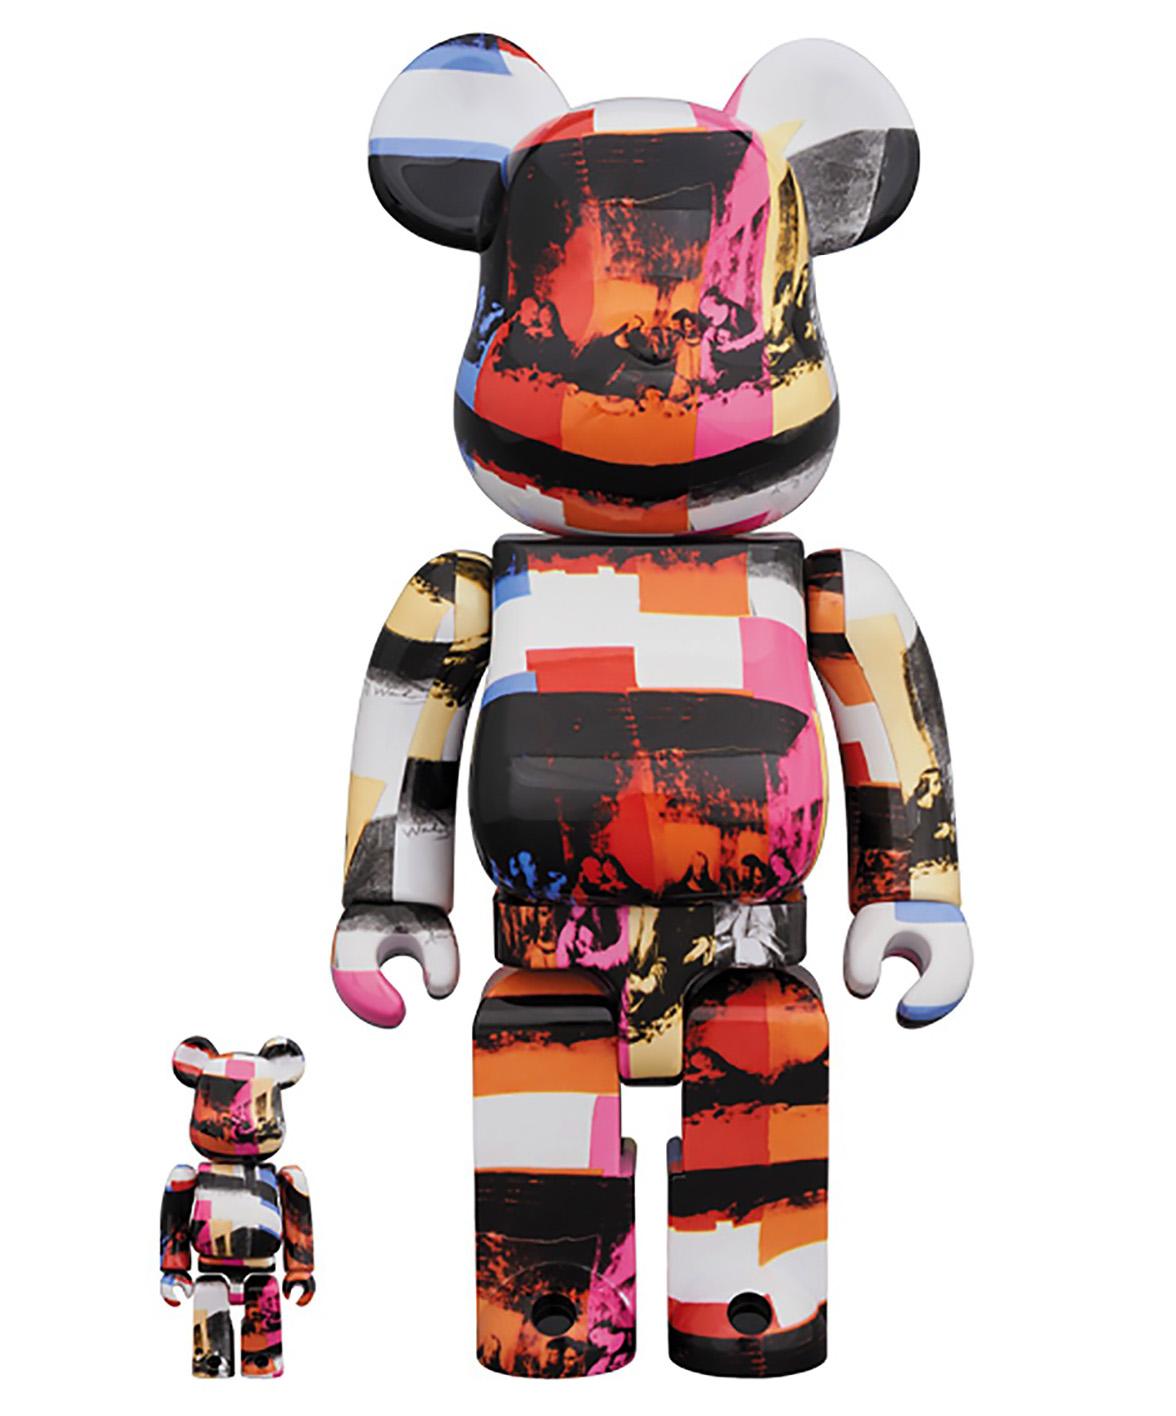 Andy Warhol Last Supper Bearbrick 400% (Warhol BE@RBRICK 400%) - Print by (after) Andy Warhol